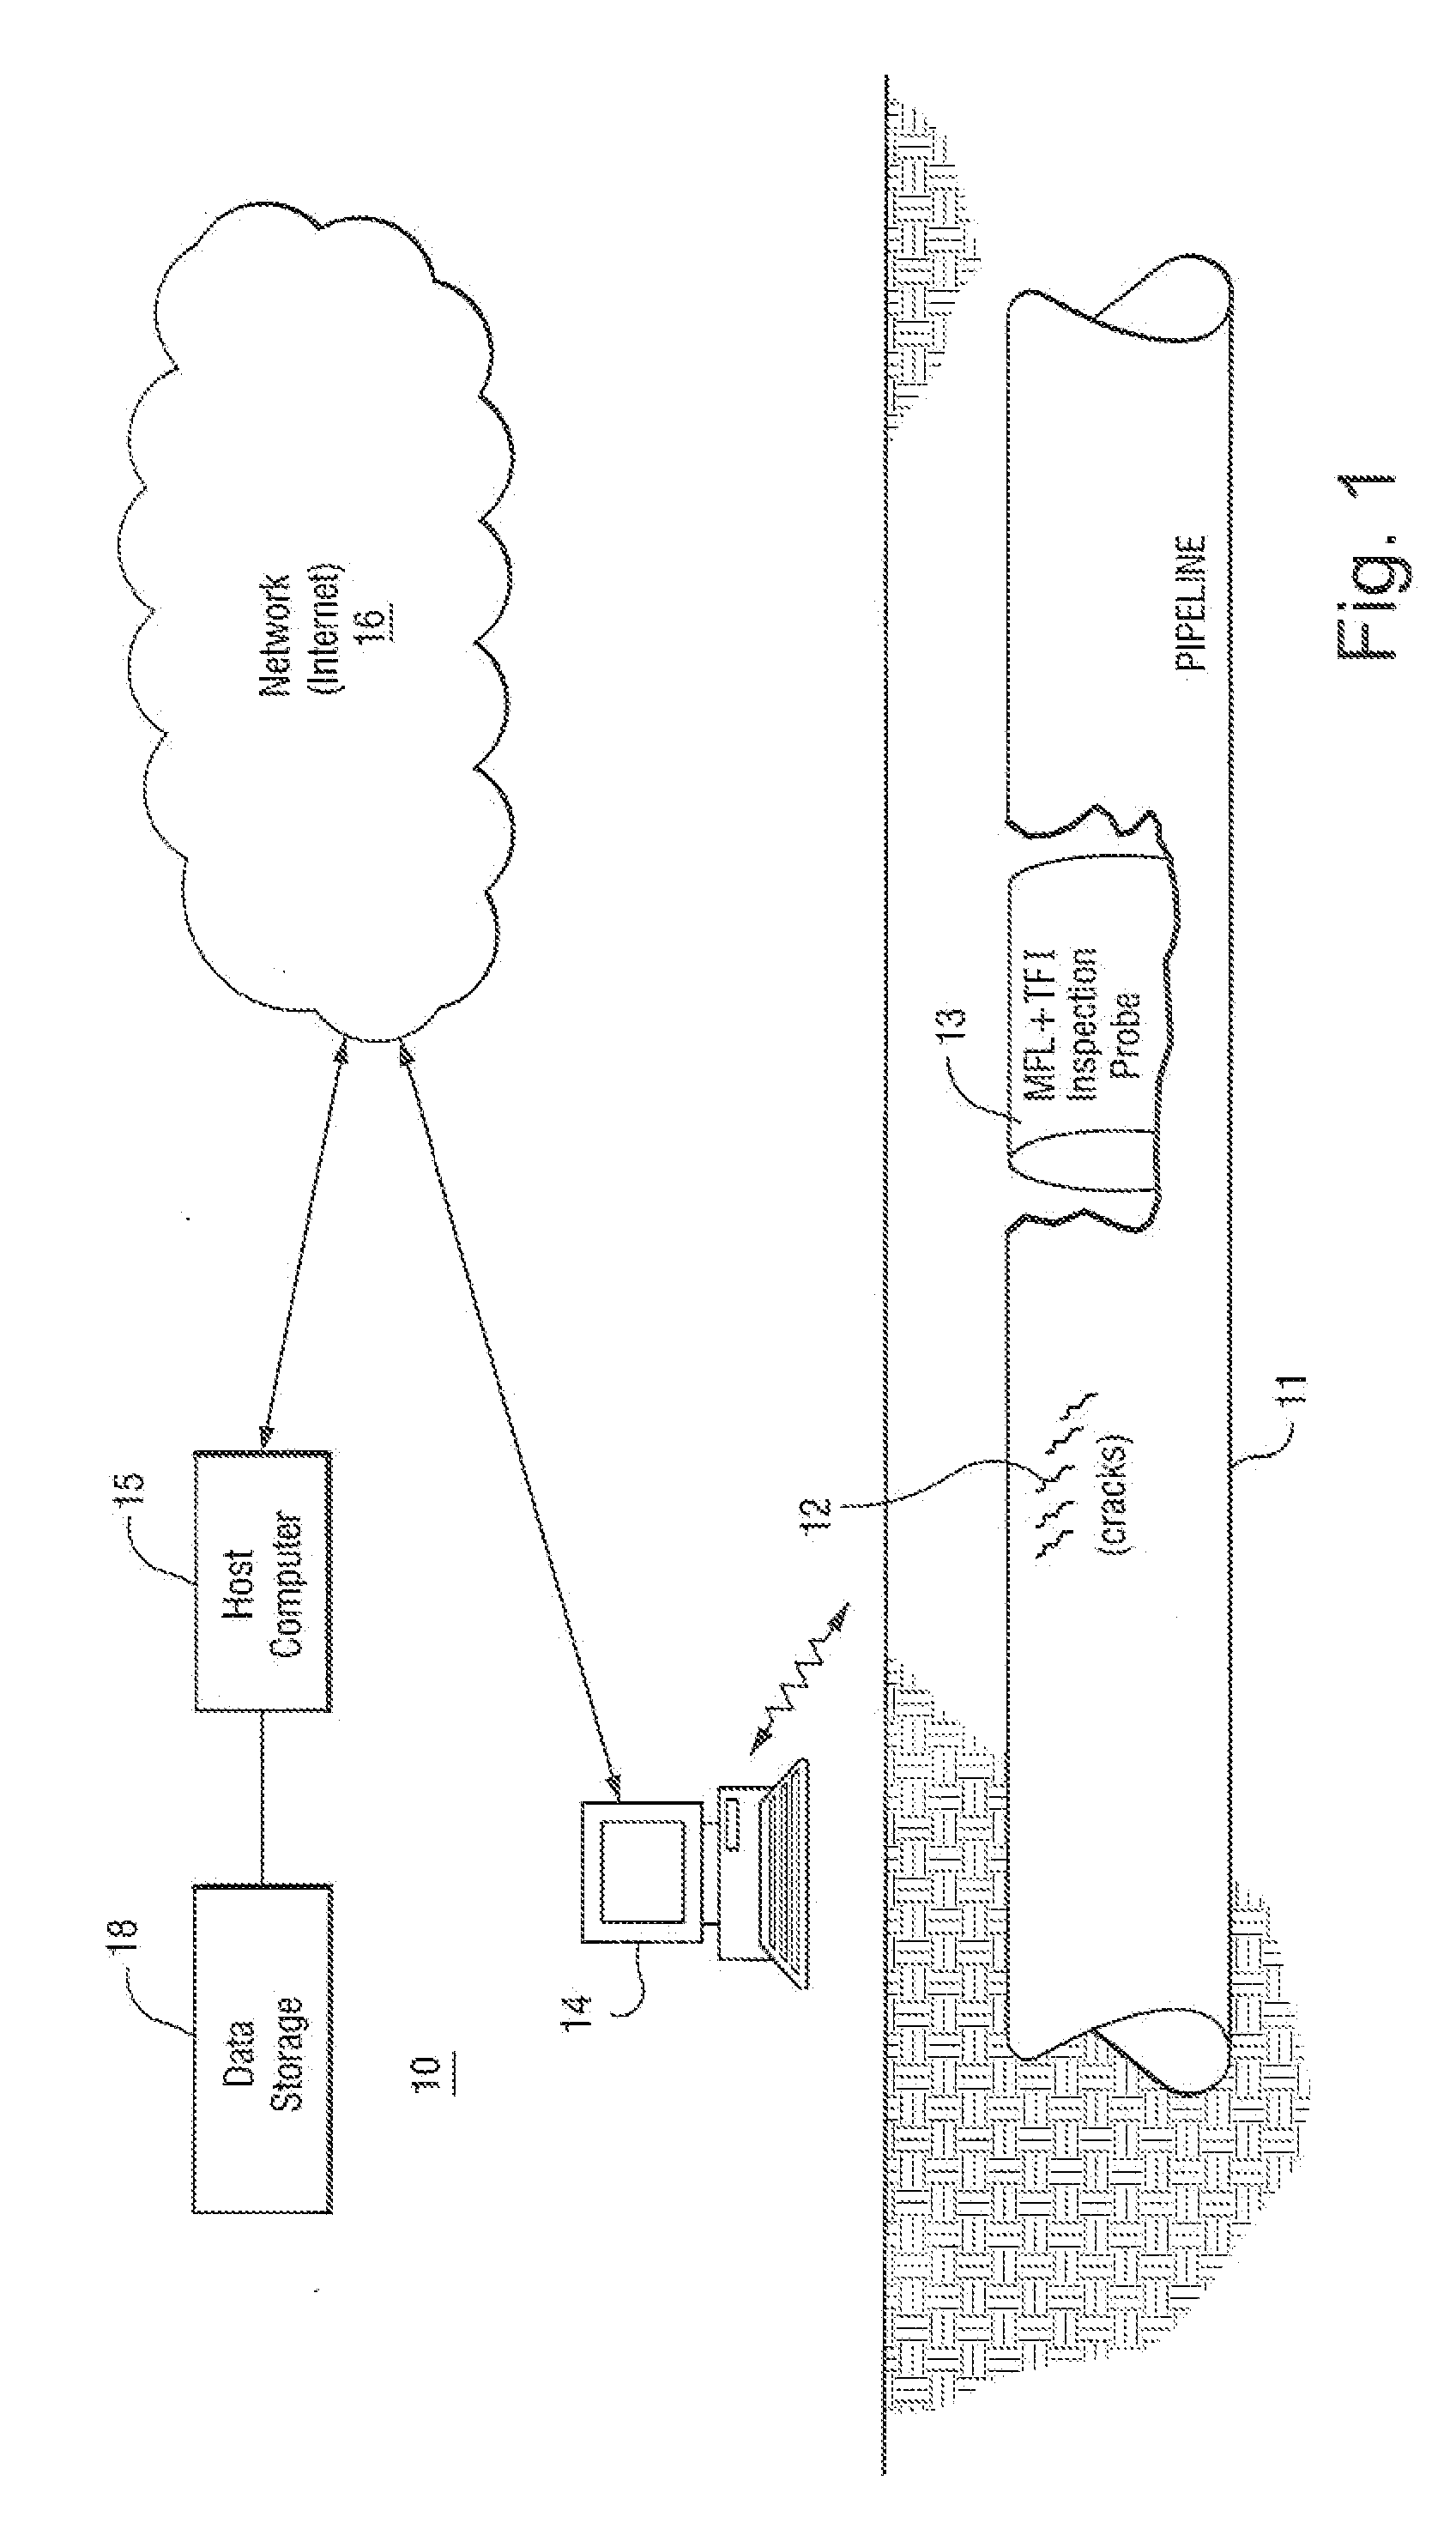 Method and apparatus inspecting pipelines using magnetic flux sensors